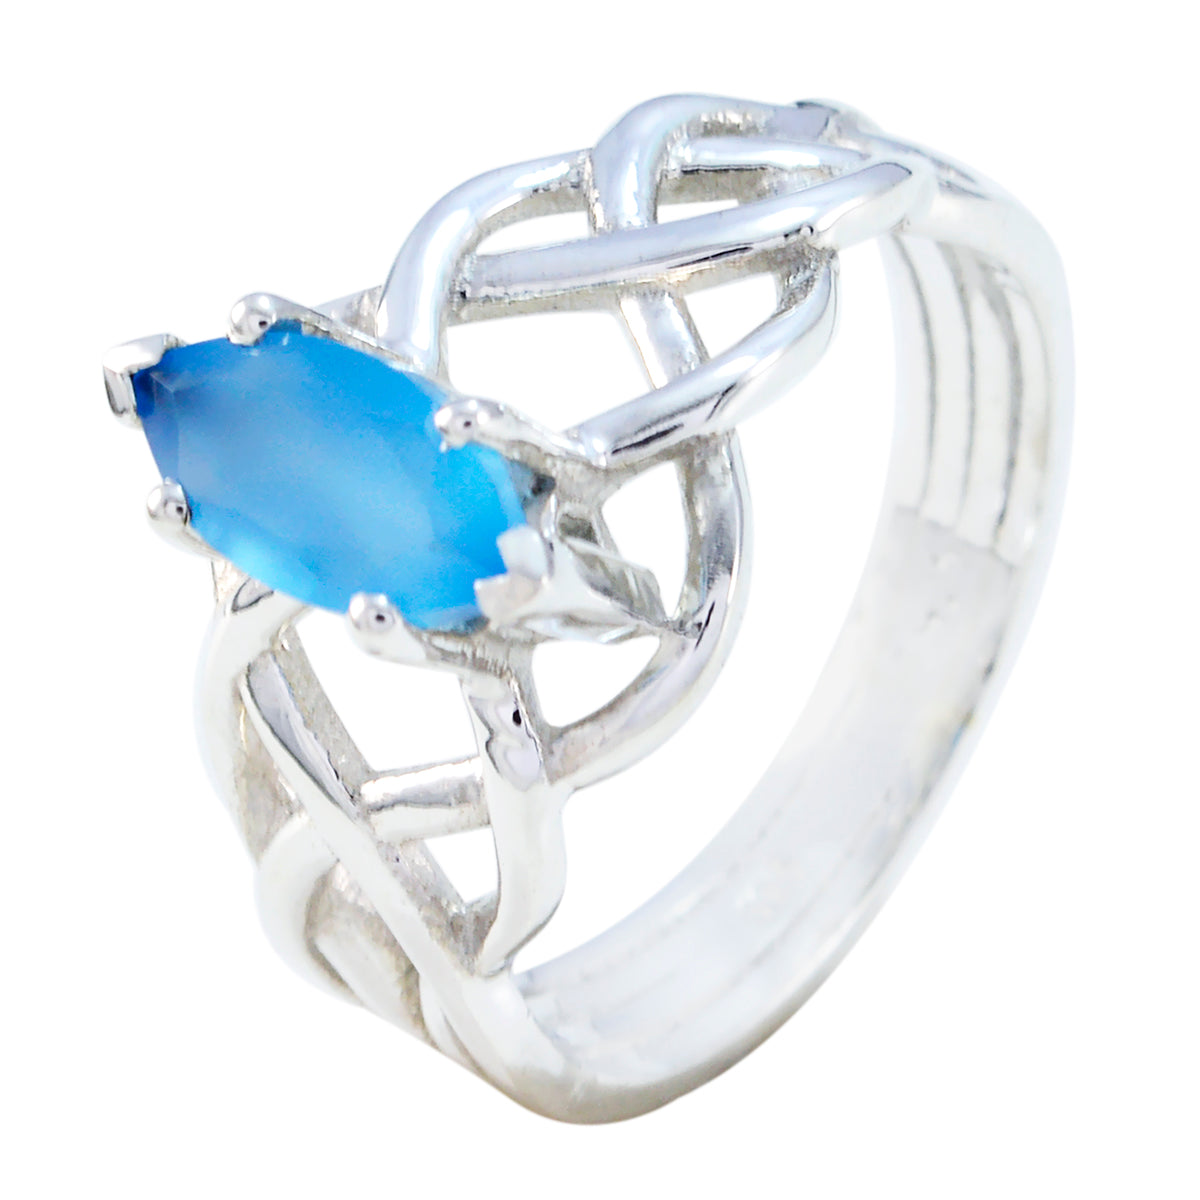 Handmade Gem Chalcedony 925 Sterling Silver Ring Remembrance Jewelry